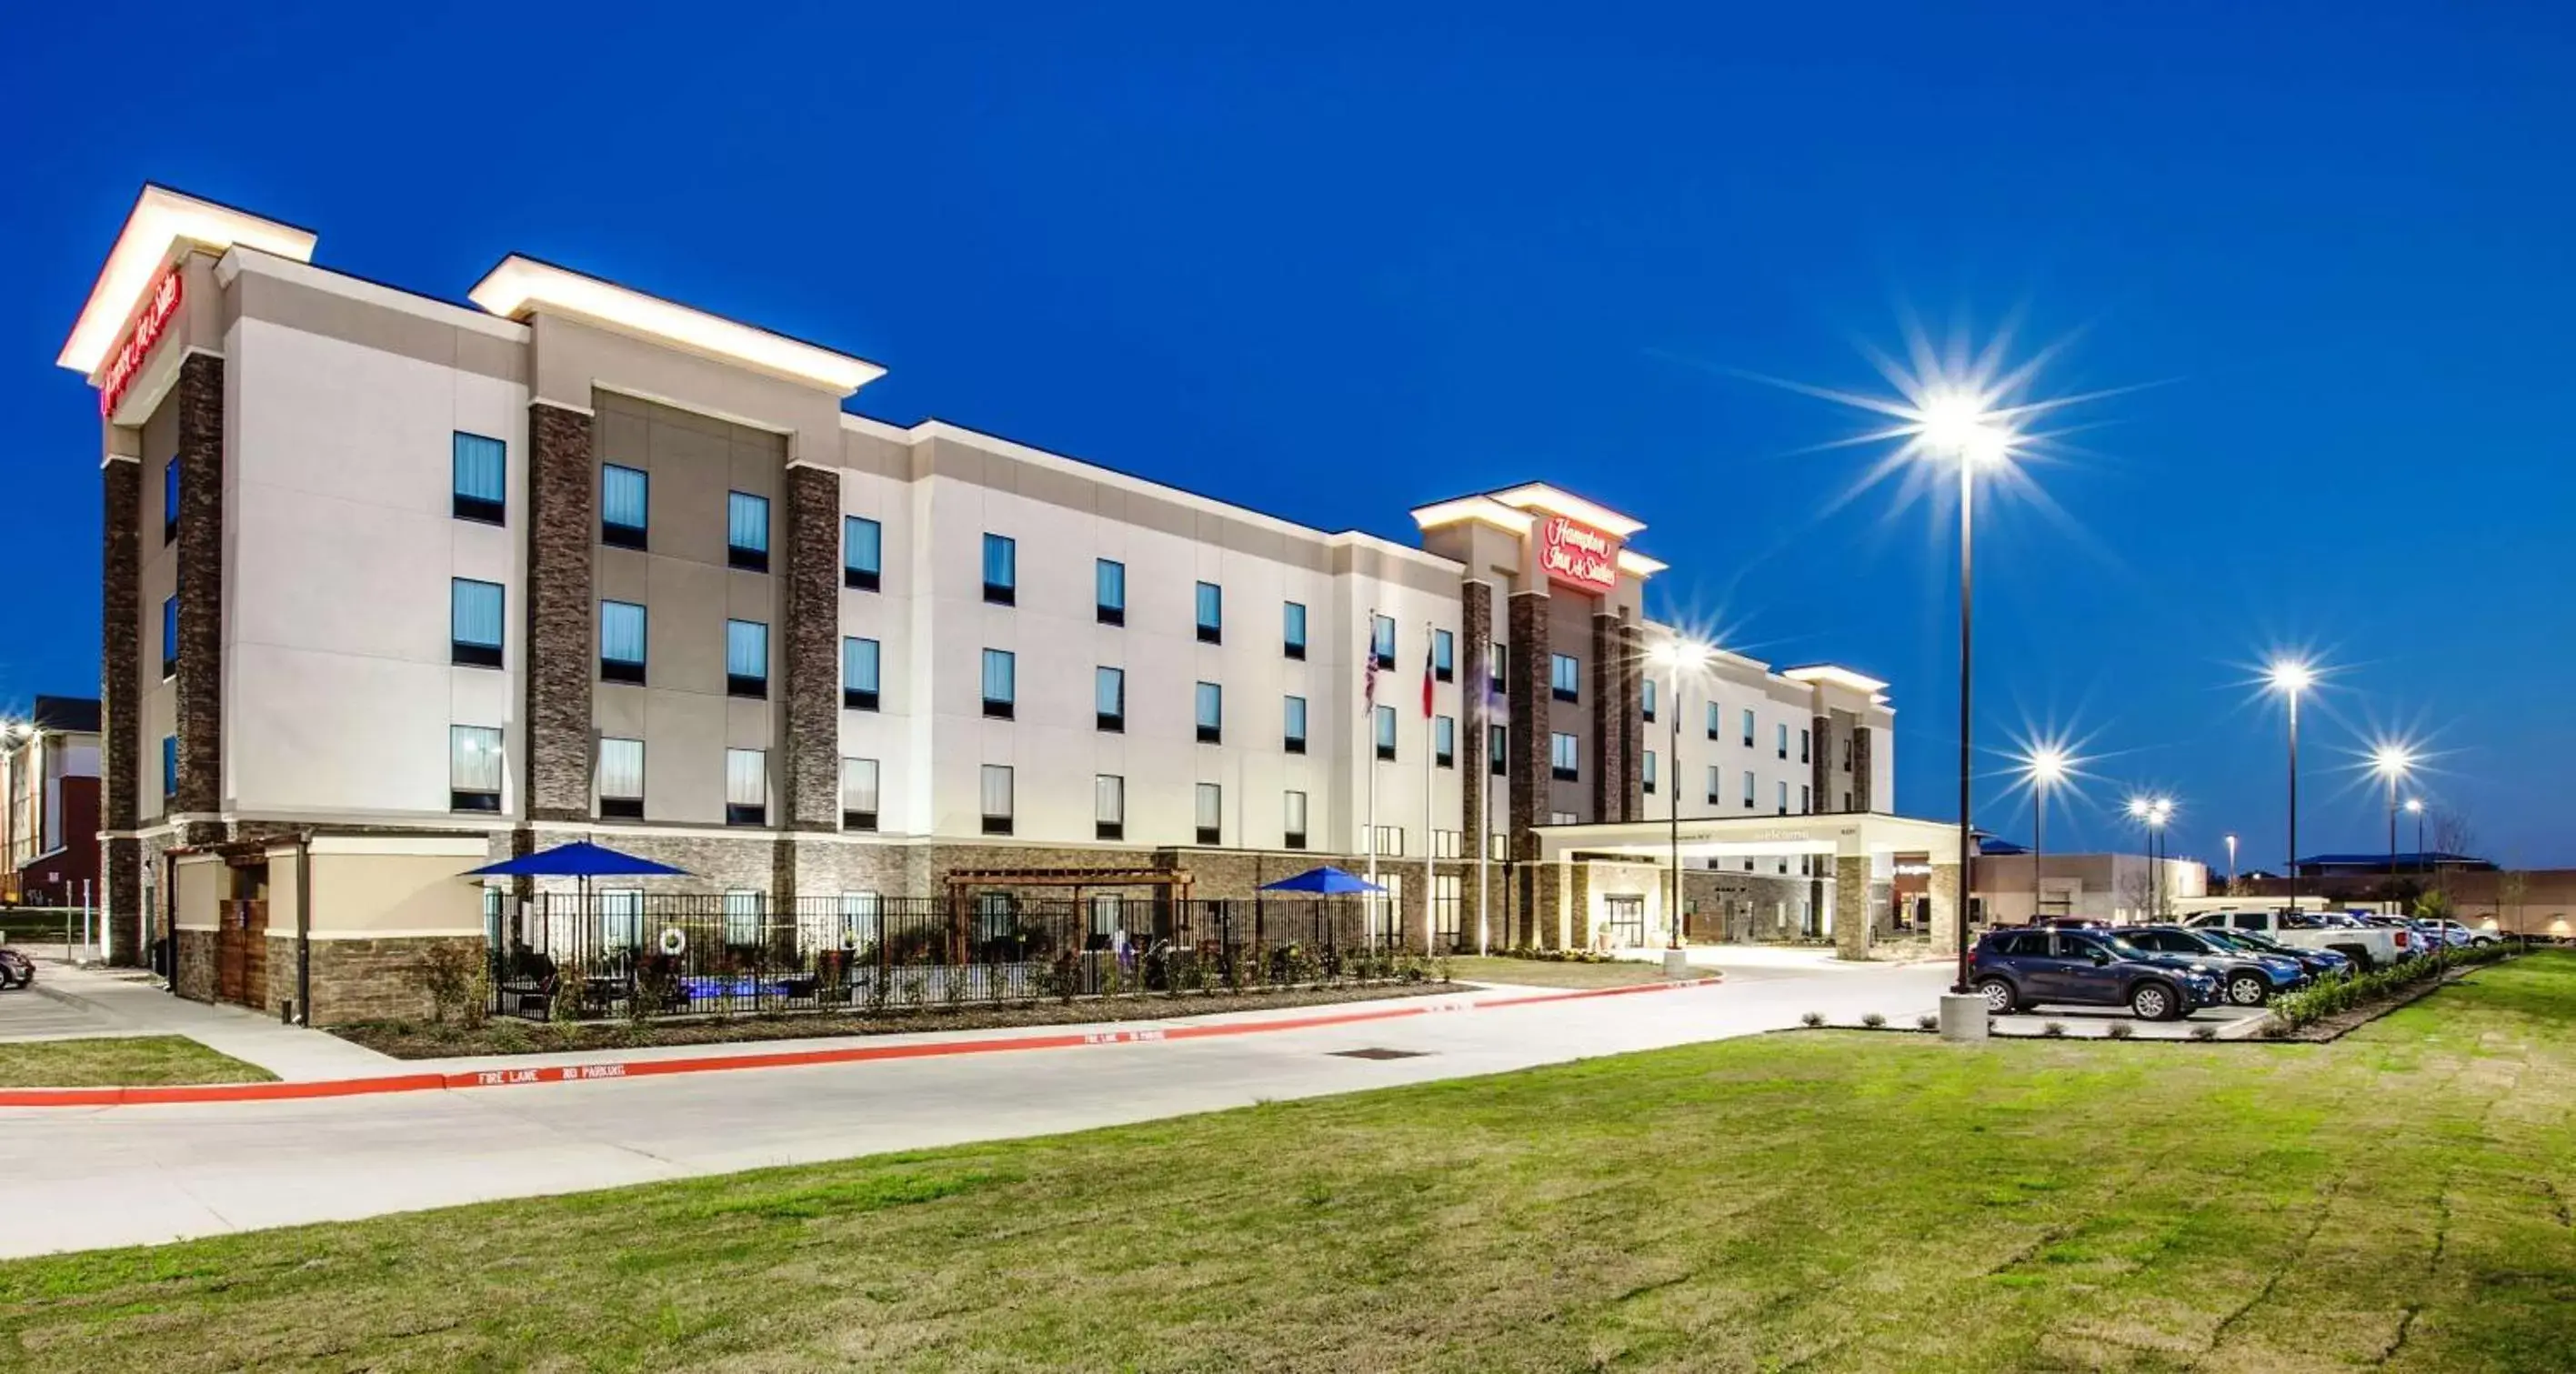 Property Building in Hampton Inn & Suites Dallas/Ft. Worth Airport South